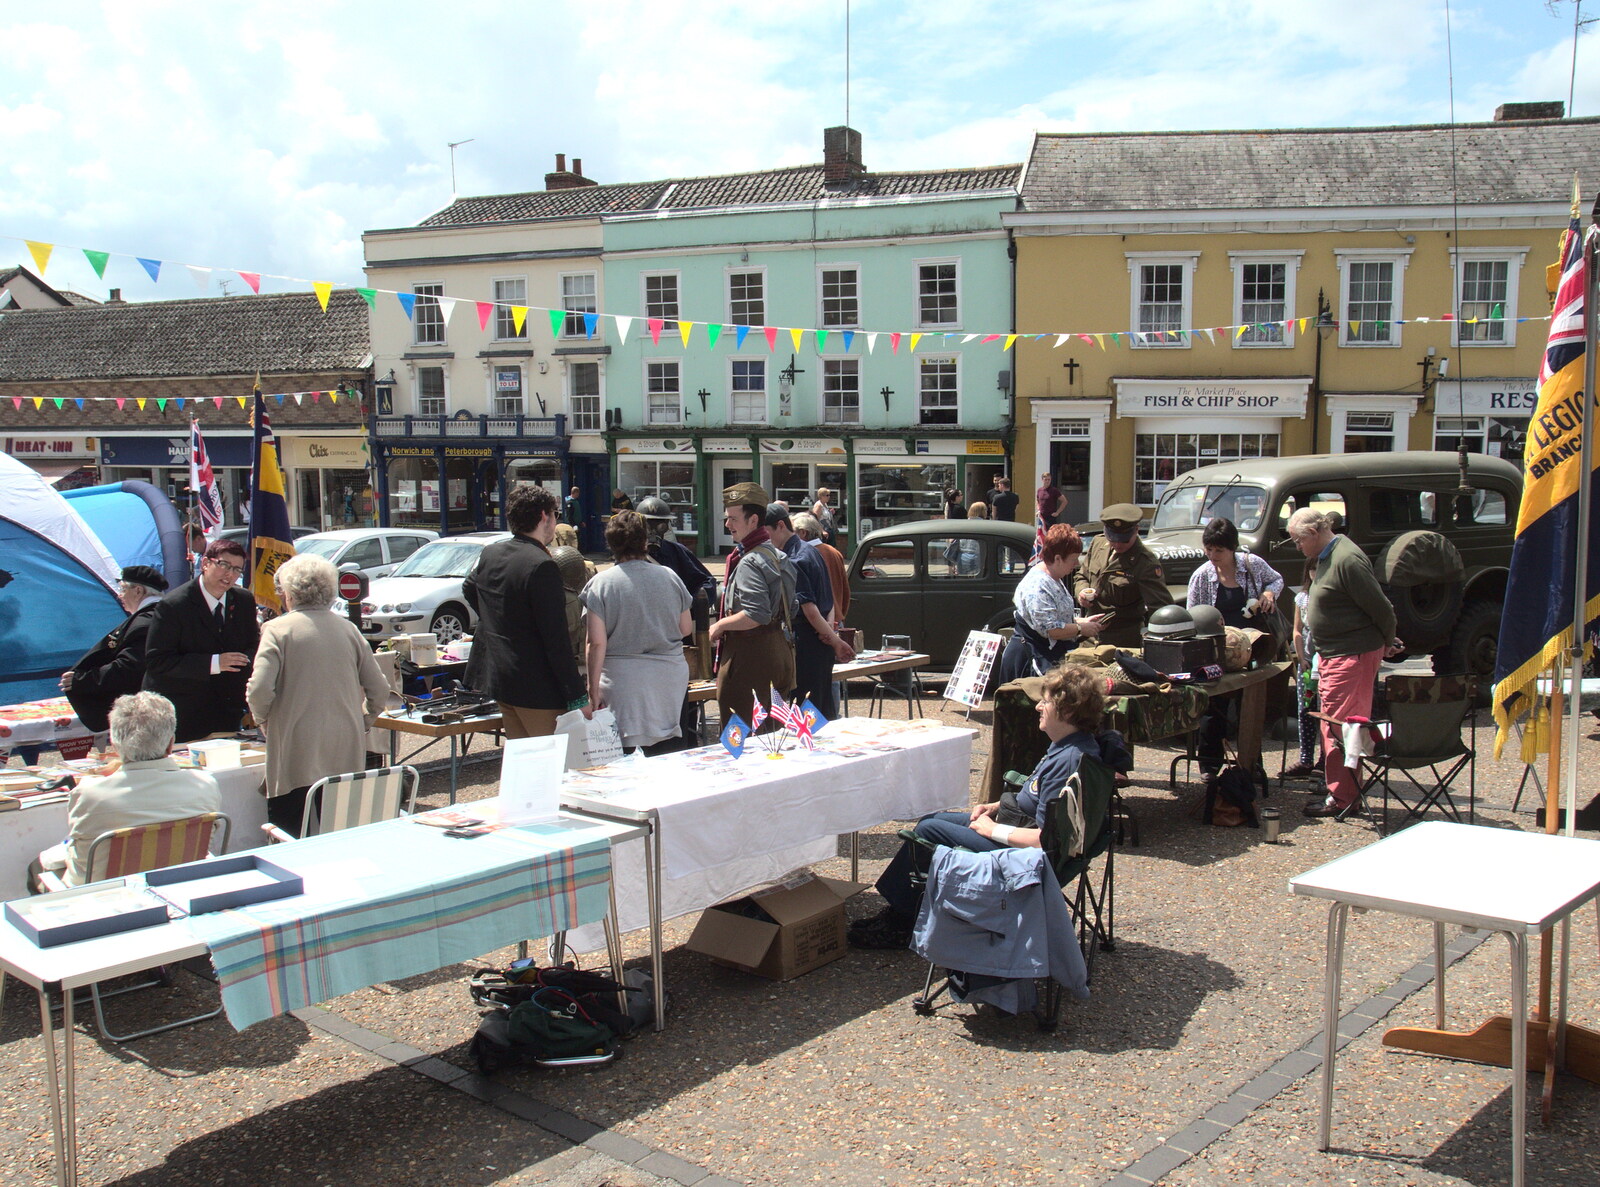 Diss Market Place from A Busy Day and a Church Fair, Diss, Norfolk - 28th June 2014